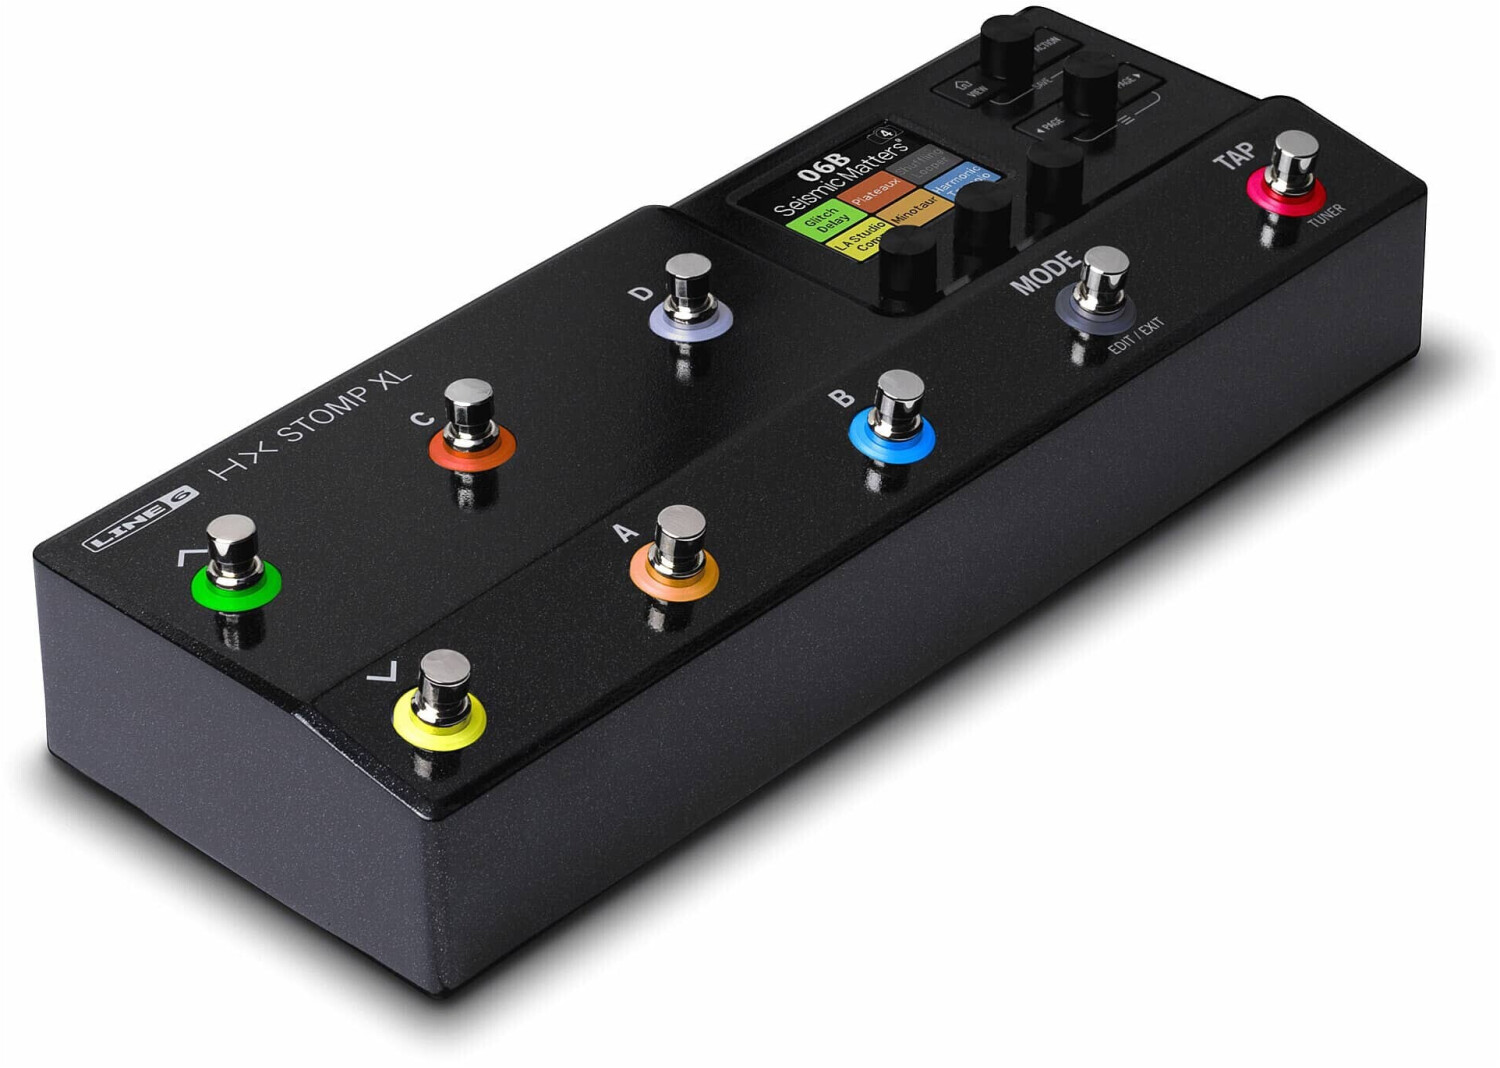 Buy Line 6 HX Stomp XL from £699.00 (Today) – Best Deals on idealo